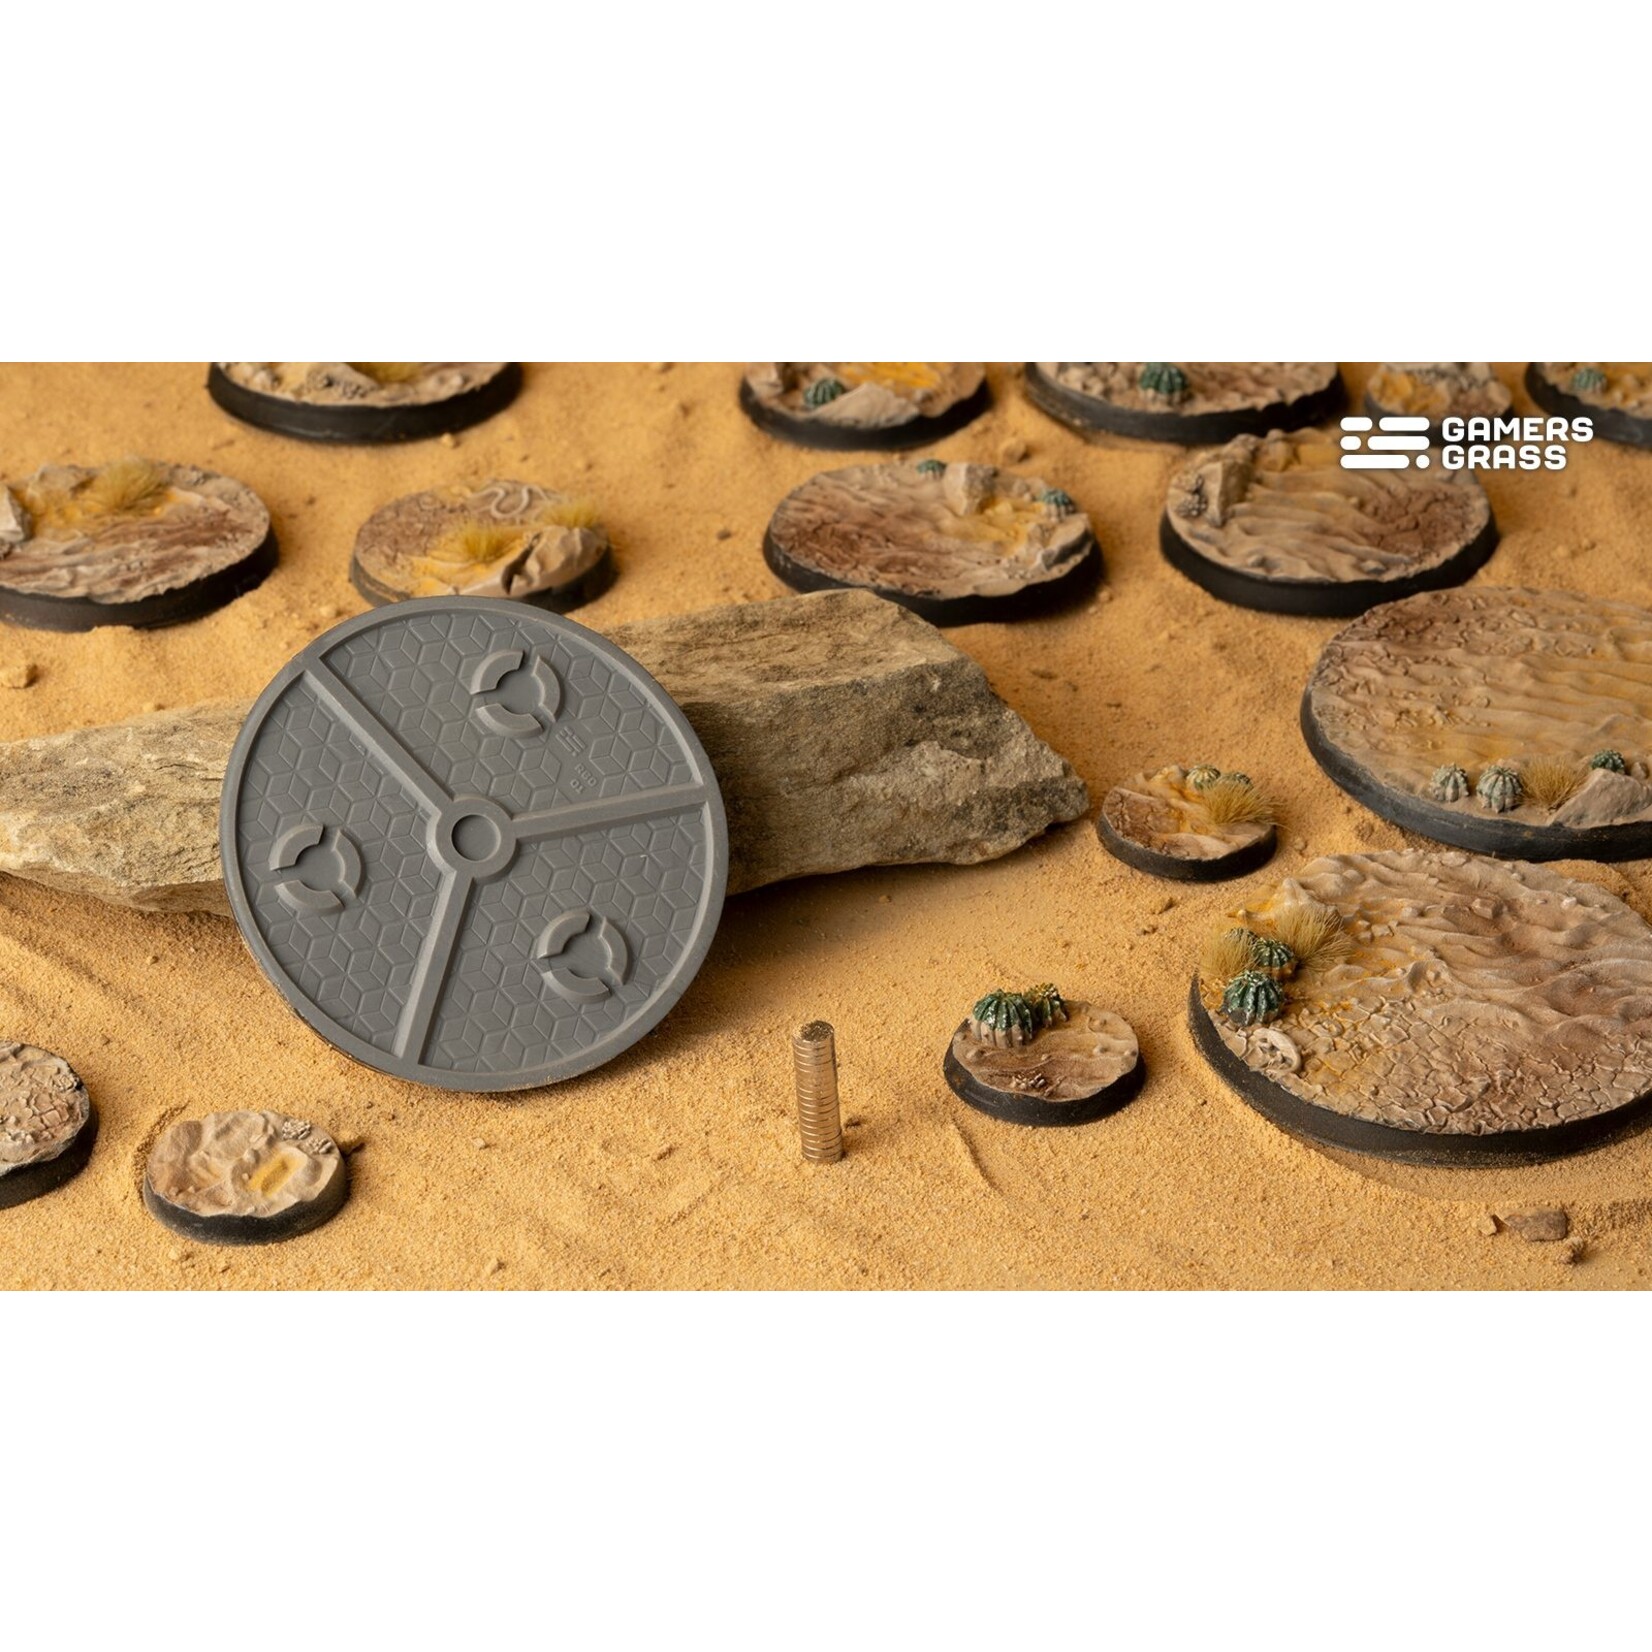 Gamers Grass Deserts of Maahl Bases Pre-Painted (2x 60mm Round)